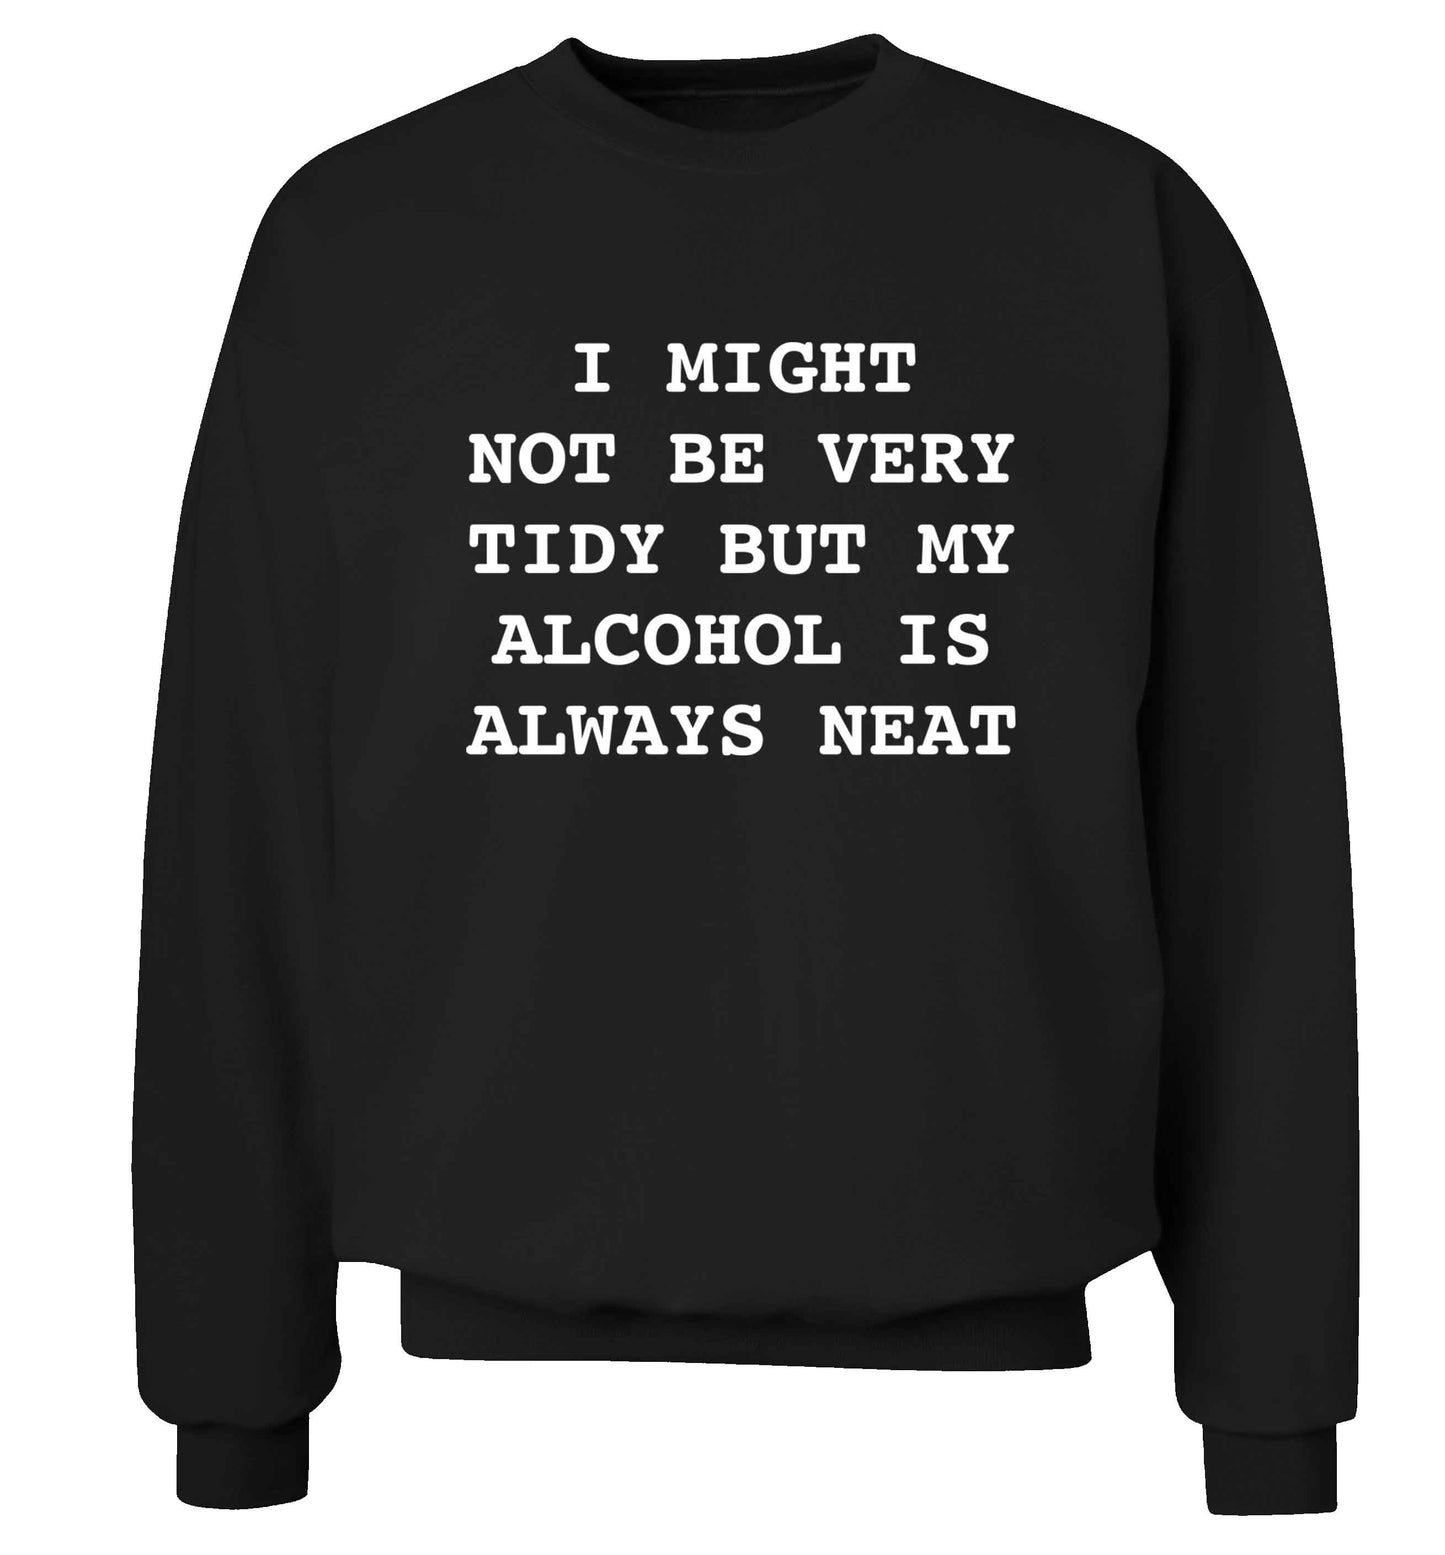 I might not be tidy but my alcohol is always neat Adult's unisex black Sweater 2XL